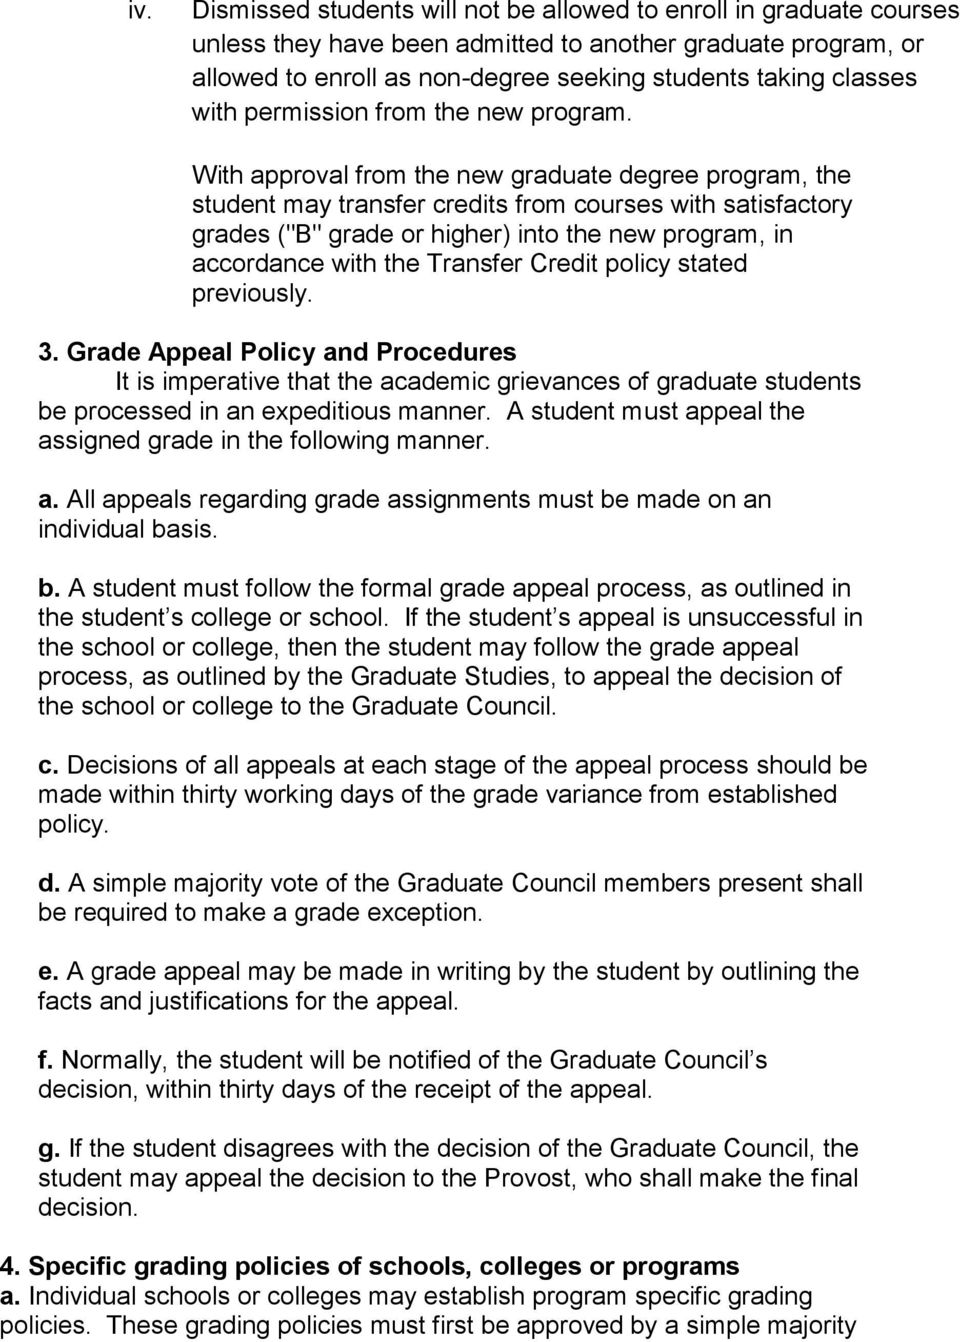 With approval from the new graduate degree program, the student may transfer credits from courses with satisfactory grades ("B" grade or higher) into the new program, in accordance with the Transfer